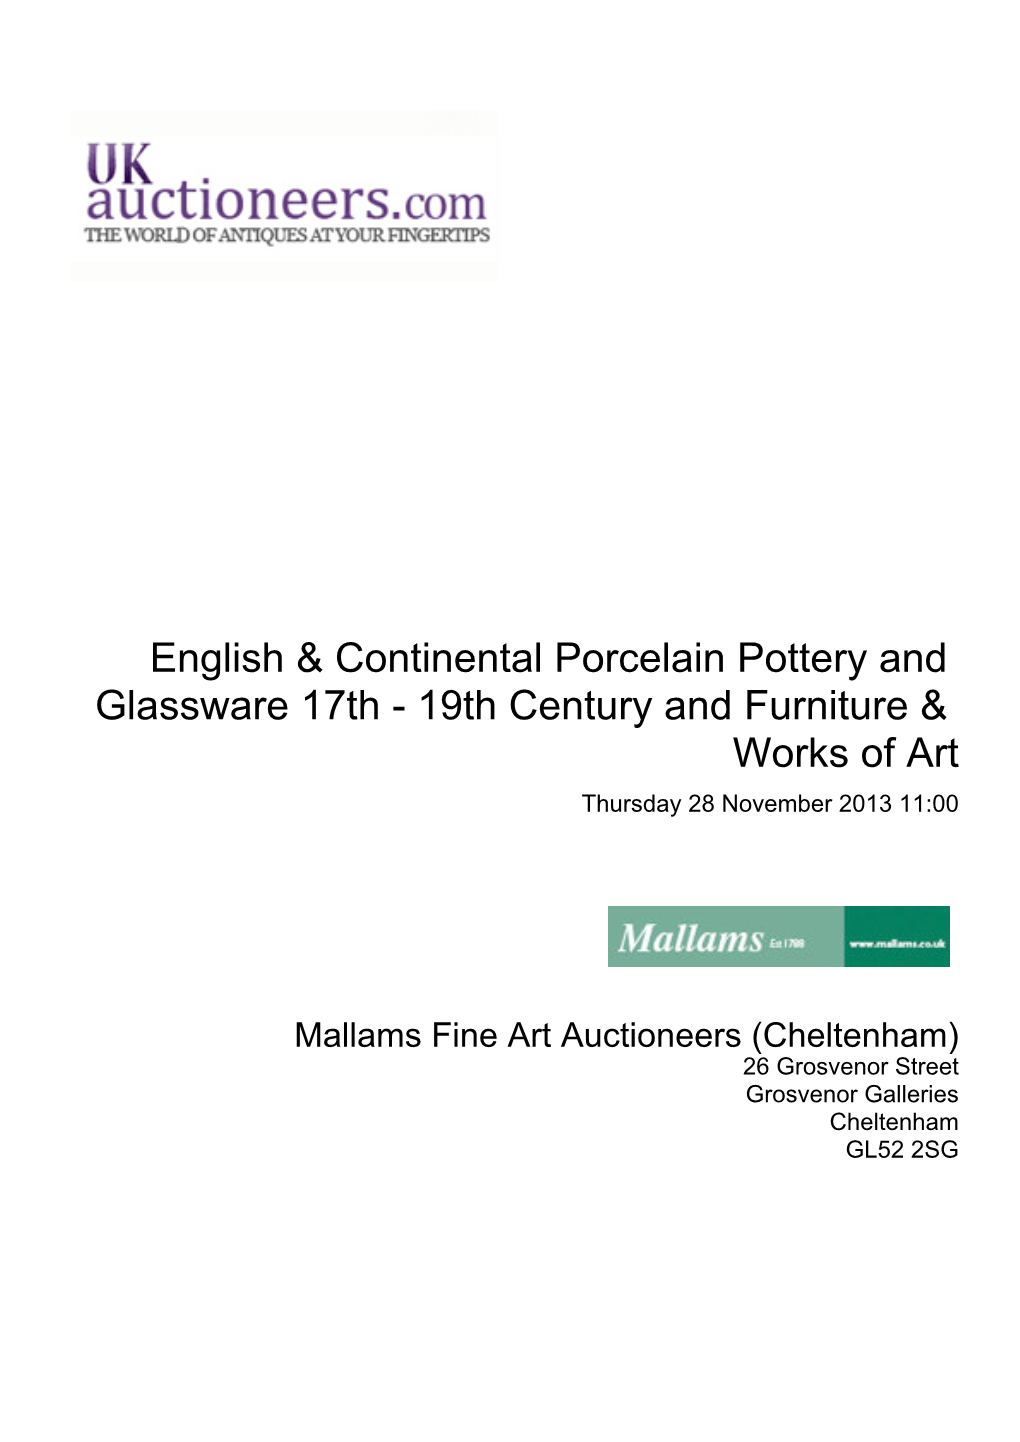 English & Continental Porcelain Pottery and Glassware 17Th